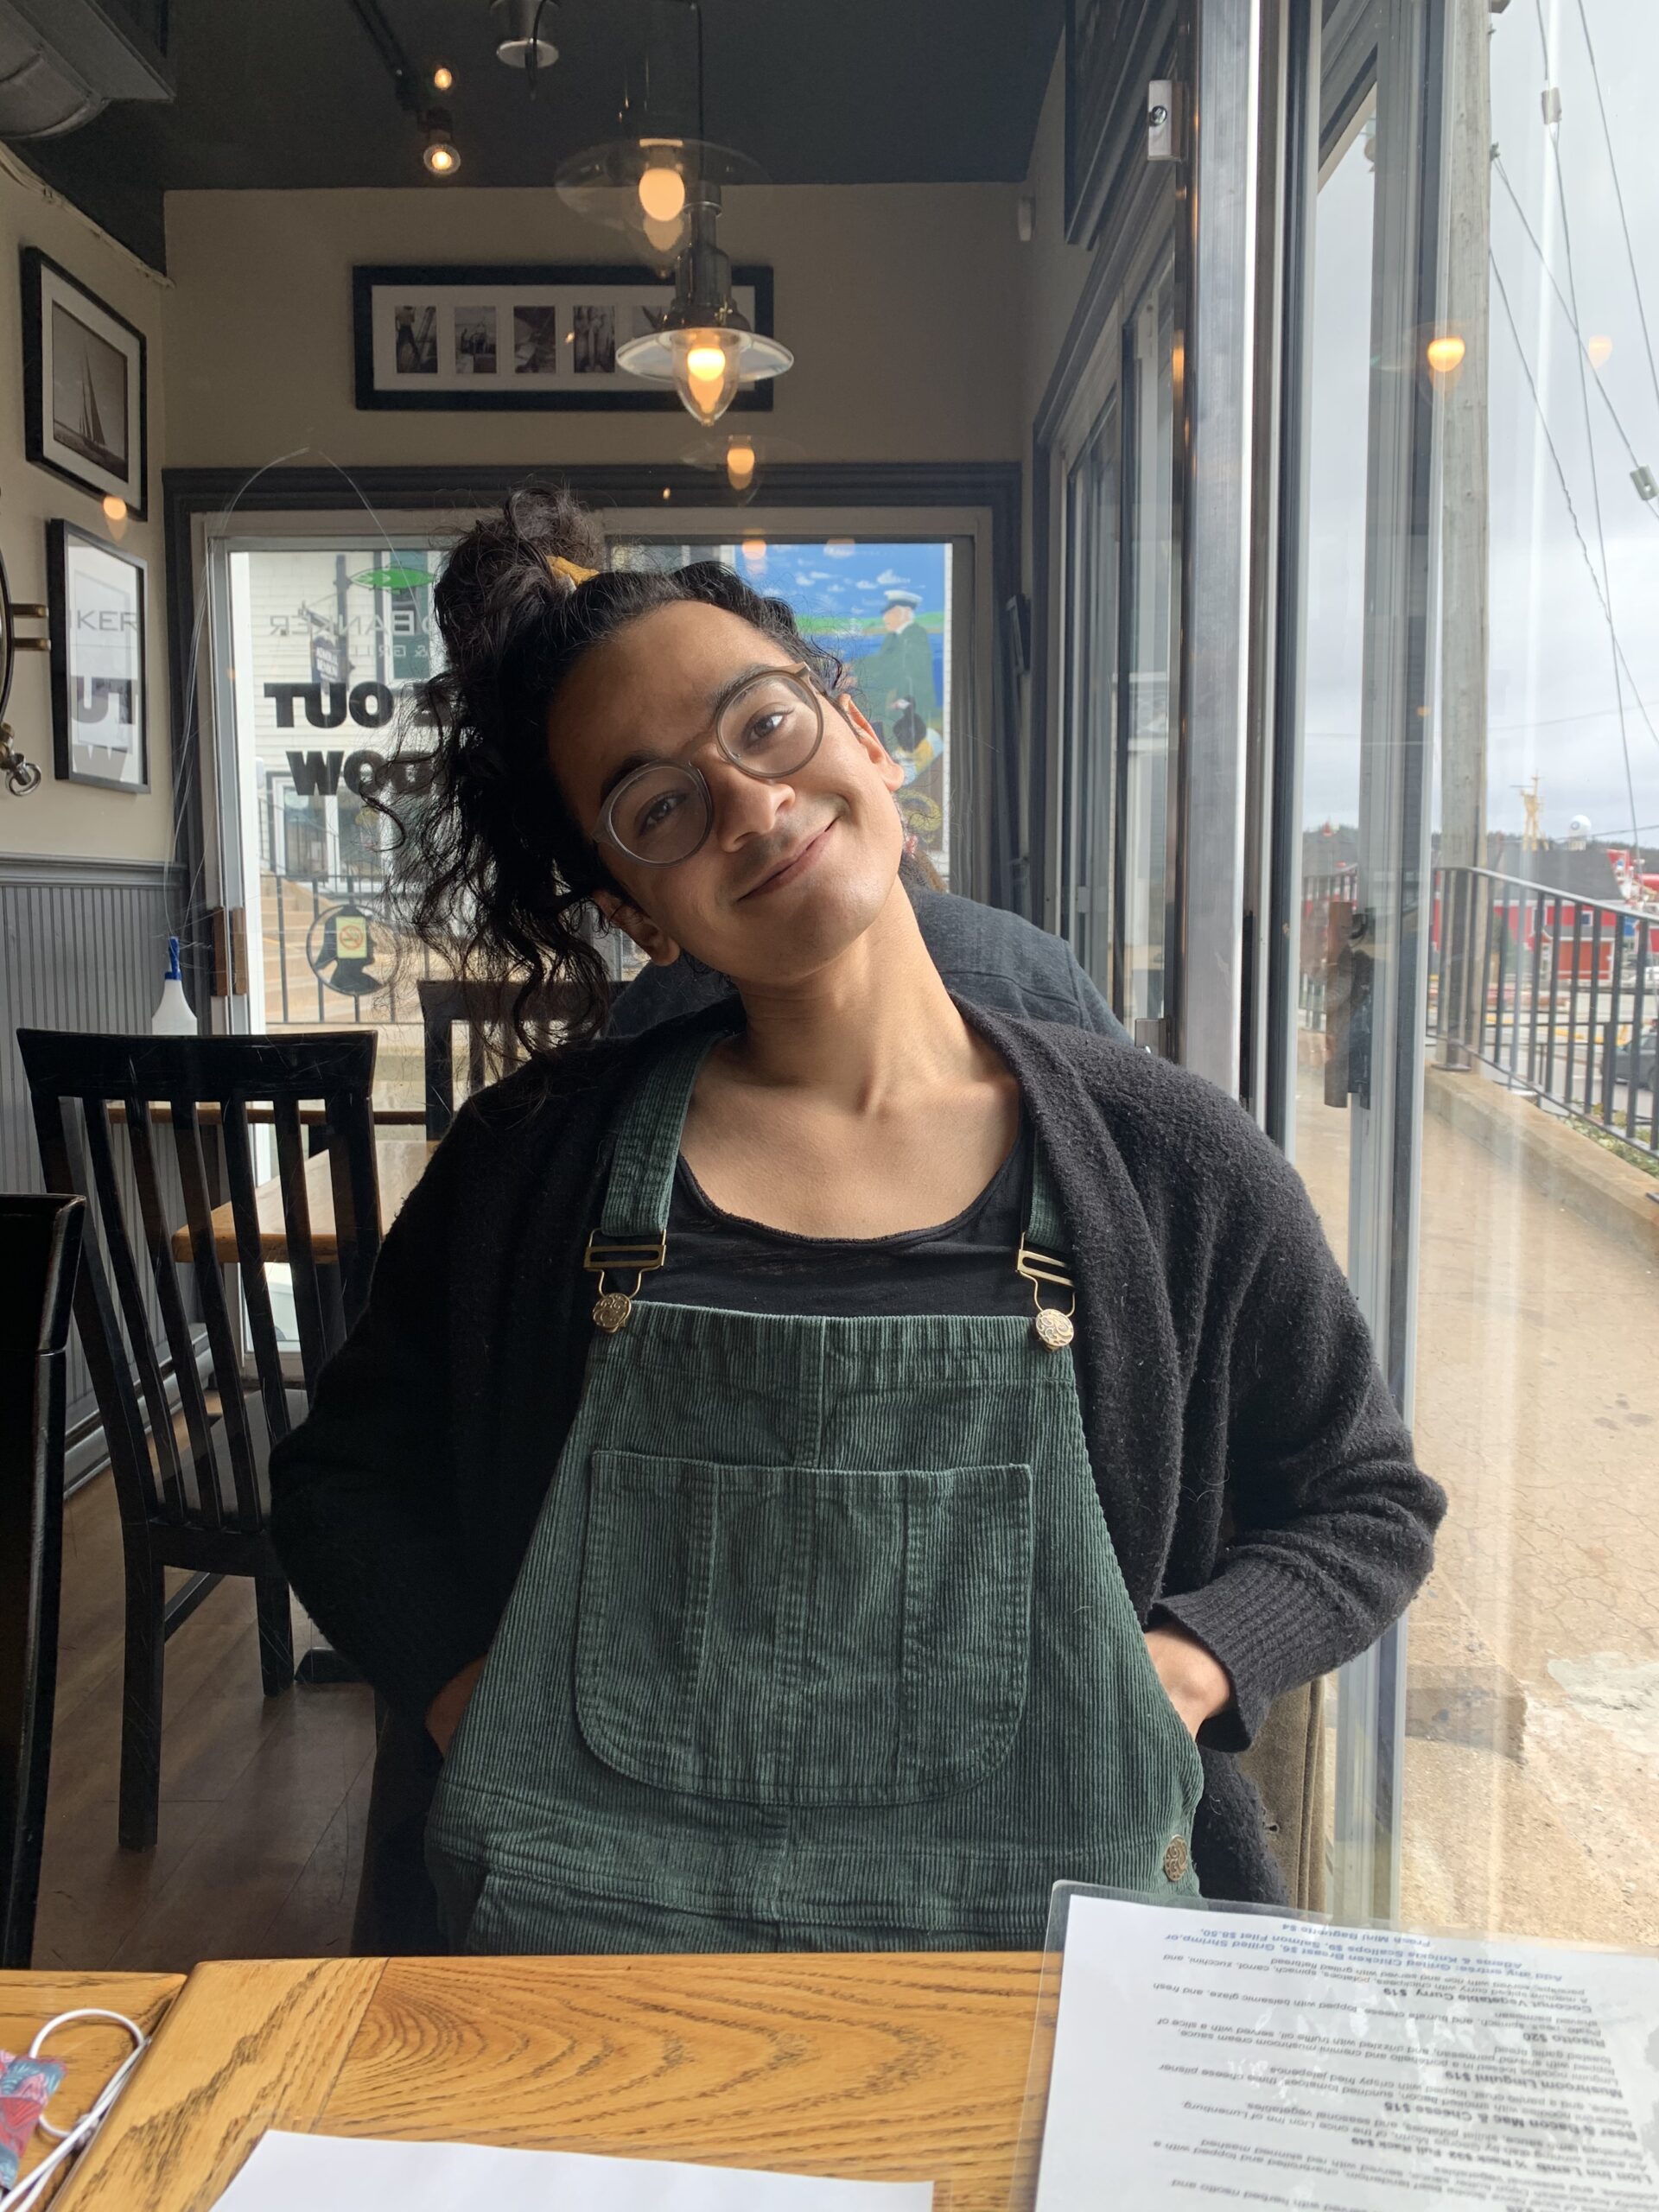 Jake Runeckles, a mixed race South Asian person with round glasses and a top bun is smiling with her head tilted to one side. She is sitting down in a café, wearing green corduroy overalls and a black cardigan, with her hands tucked in her pockets.